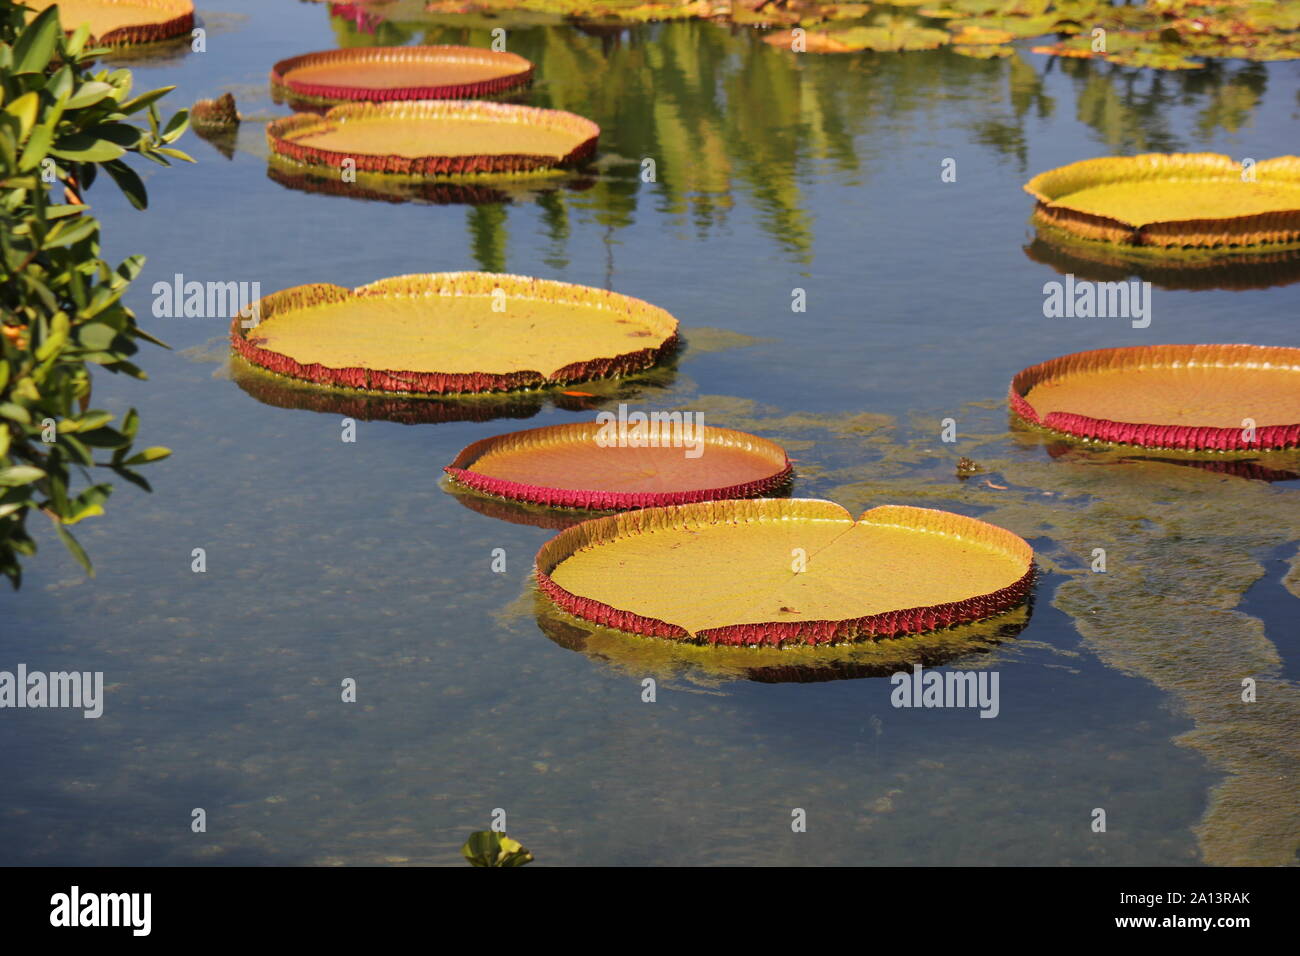 Green giant water lily pads growing in the pond, Victoria, Nymphaeaceae, Victoria amazonica, Euryale amazonica, Victoria regia Stock Photo